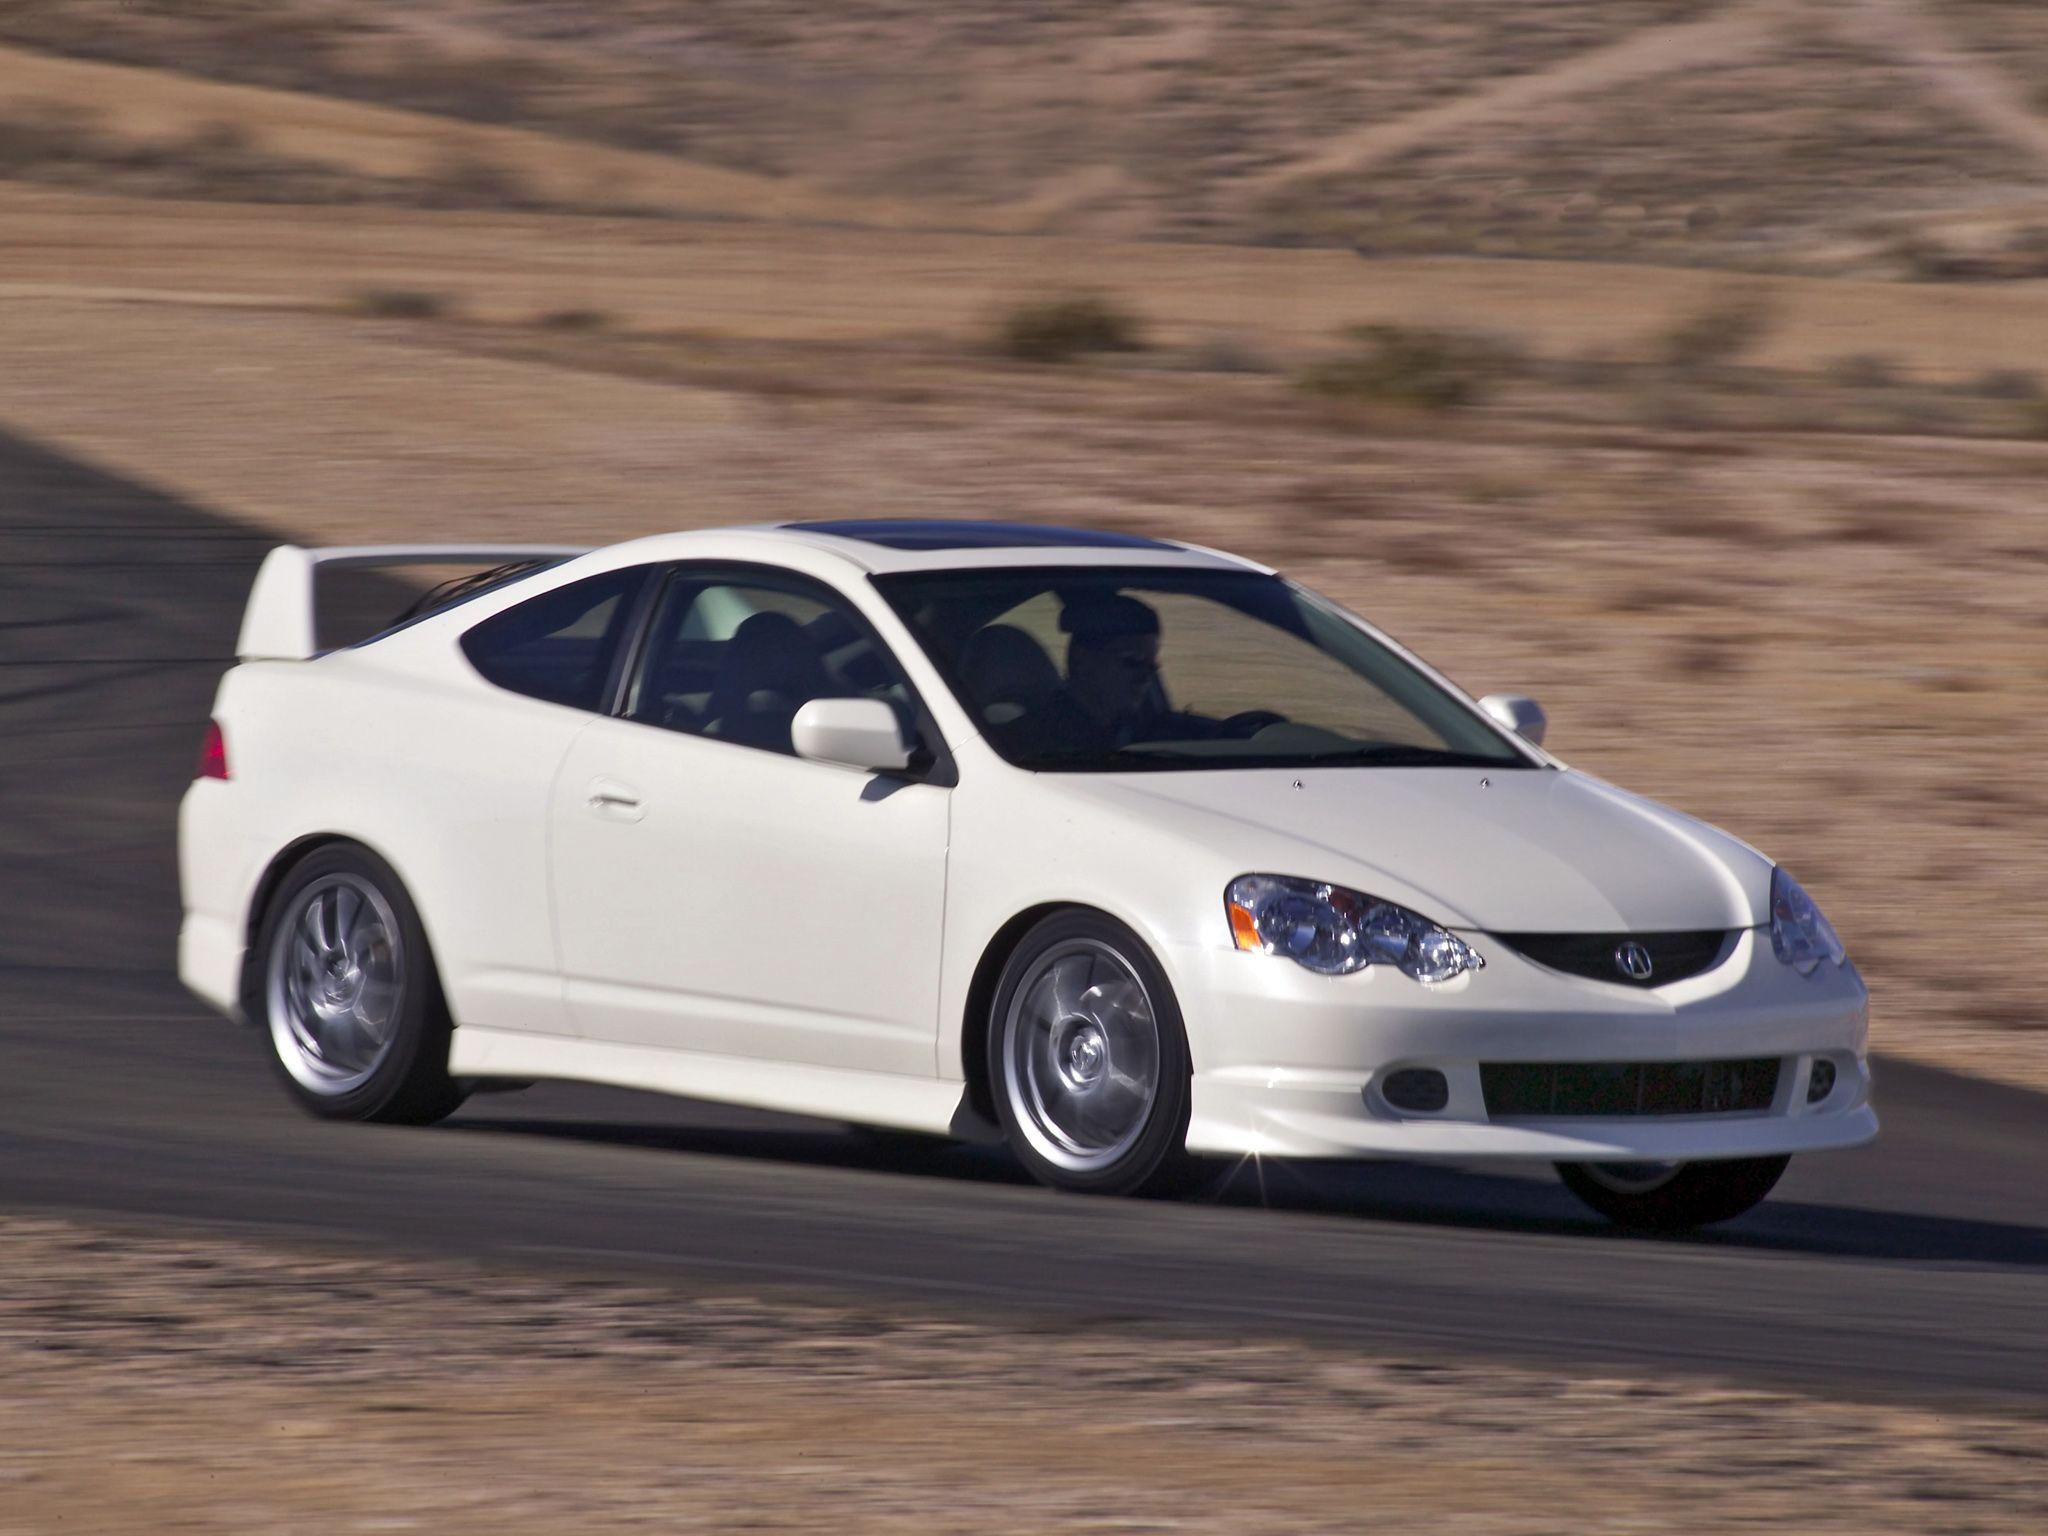 Best Image About Acura RSX Type S. Good Photo. Acura Rsx Type S, Acura Rsx, Acura